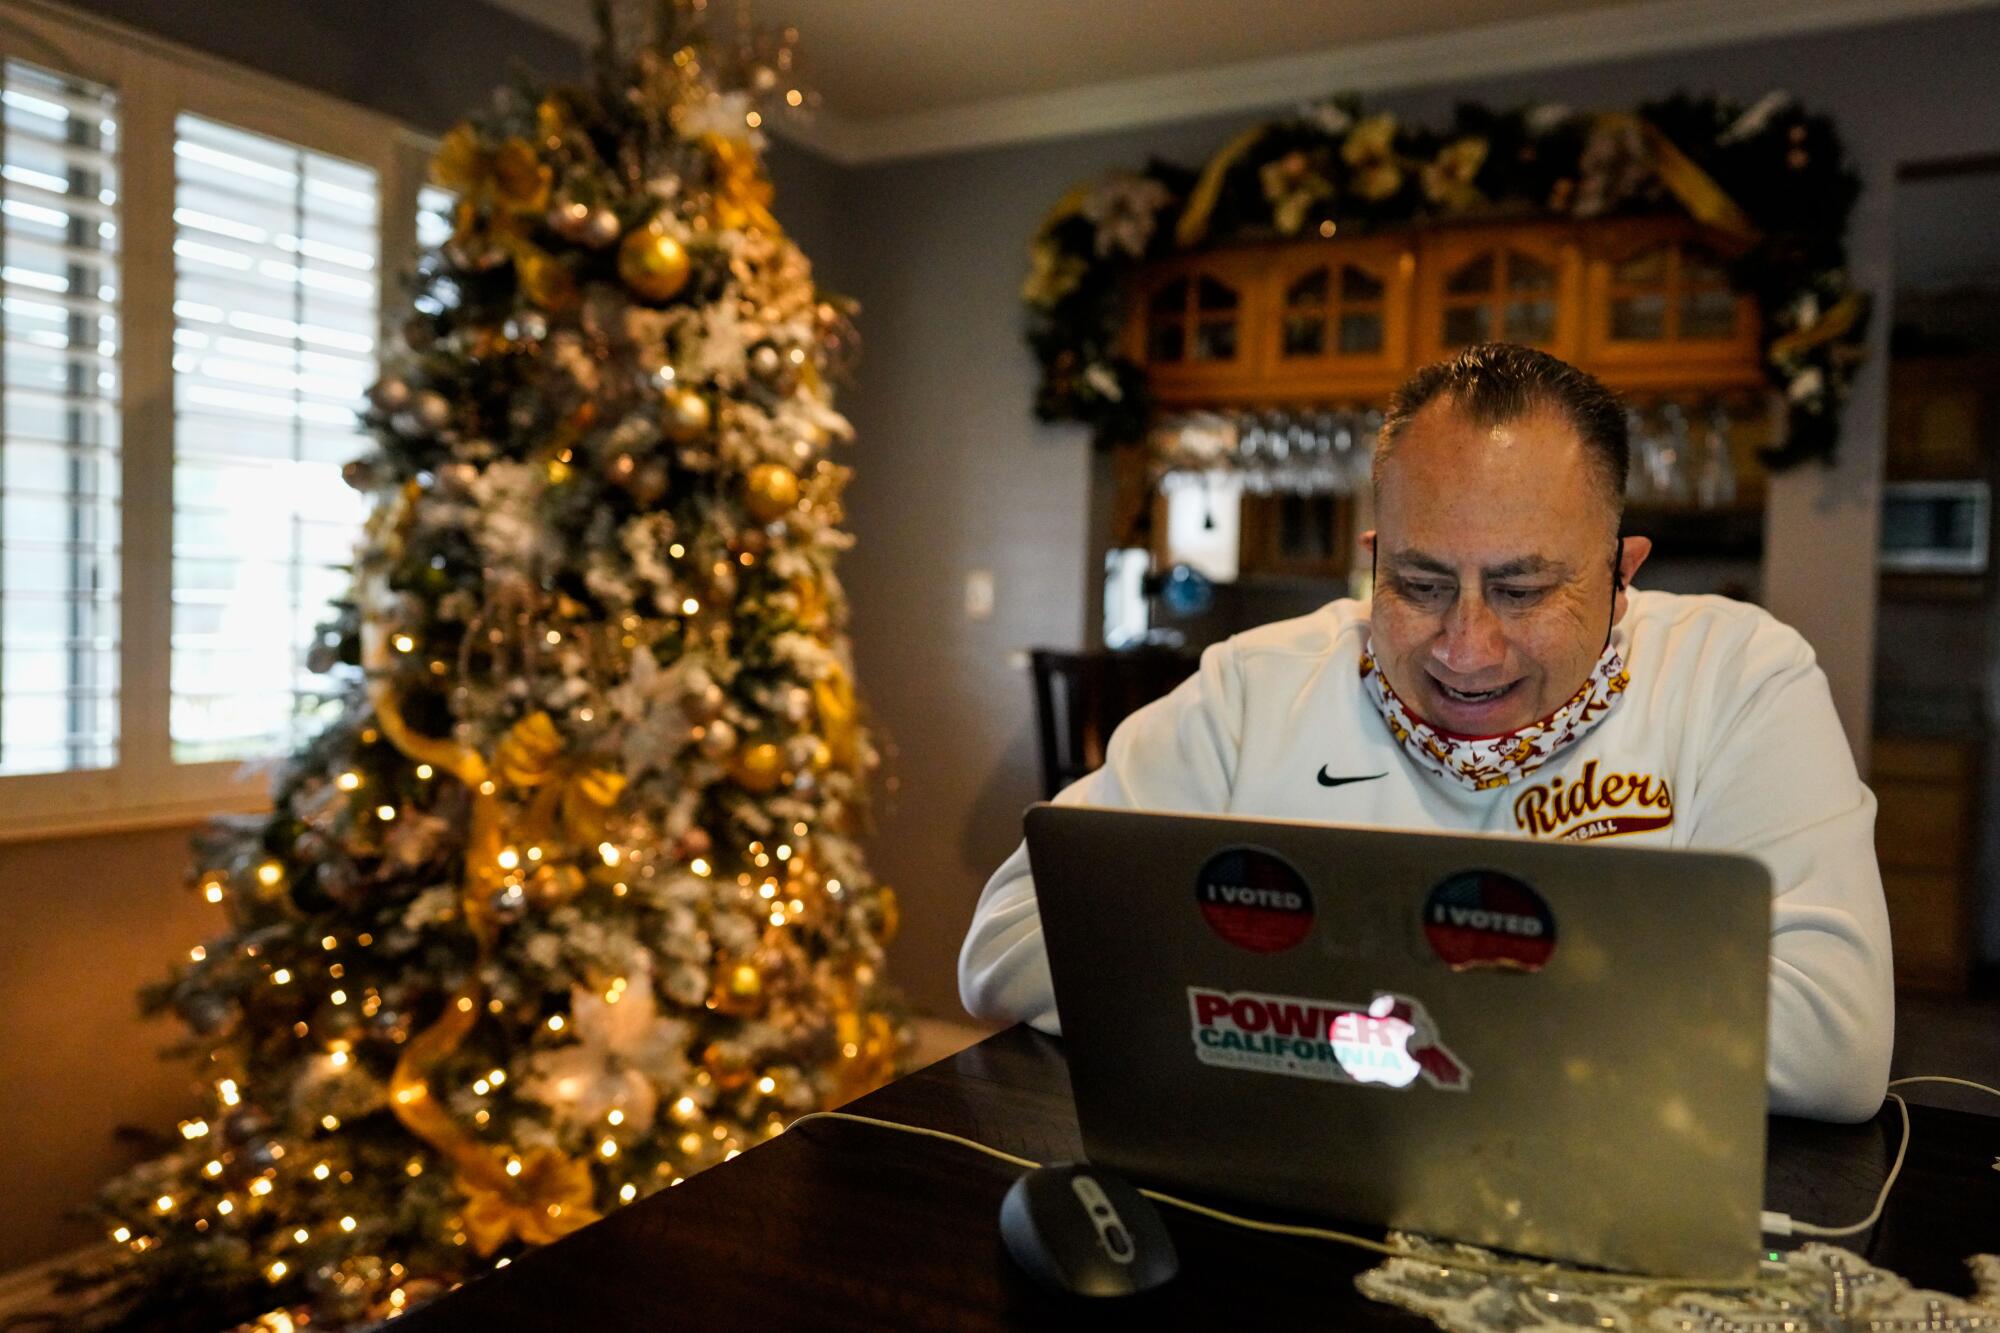 Roosevelt football coach Aldo Parral conducts team practice during a Zoom videoconference on Dec. 17.